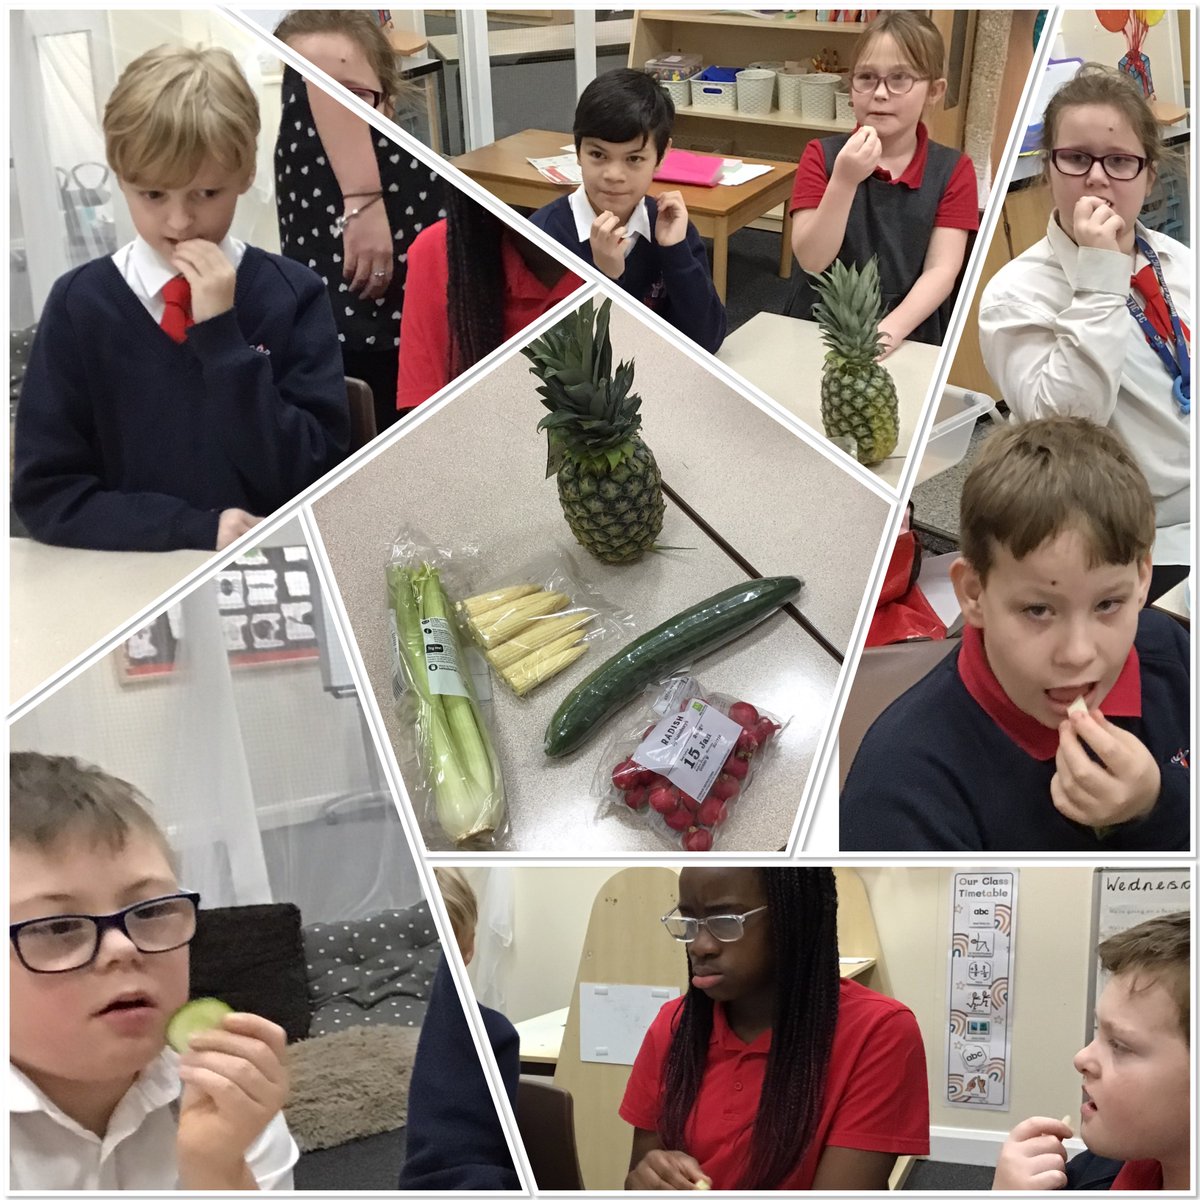 We tried 5 fruit and vegetables yesterday, some of which were new to the children, but they all had a taste of them
@BewellW #letsgetmovin’ #5waystobegreat